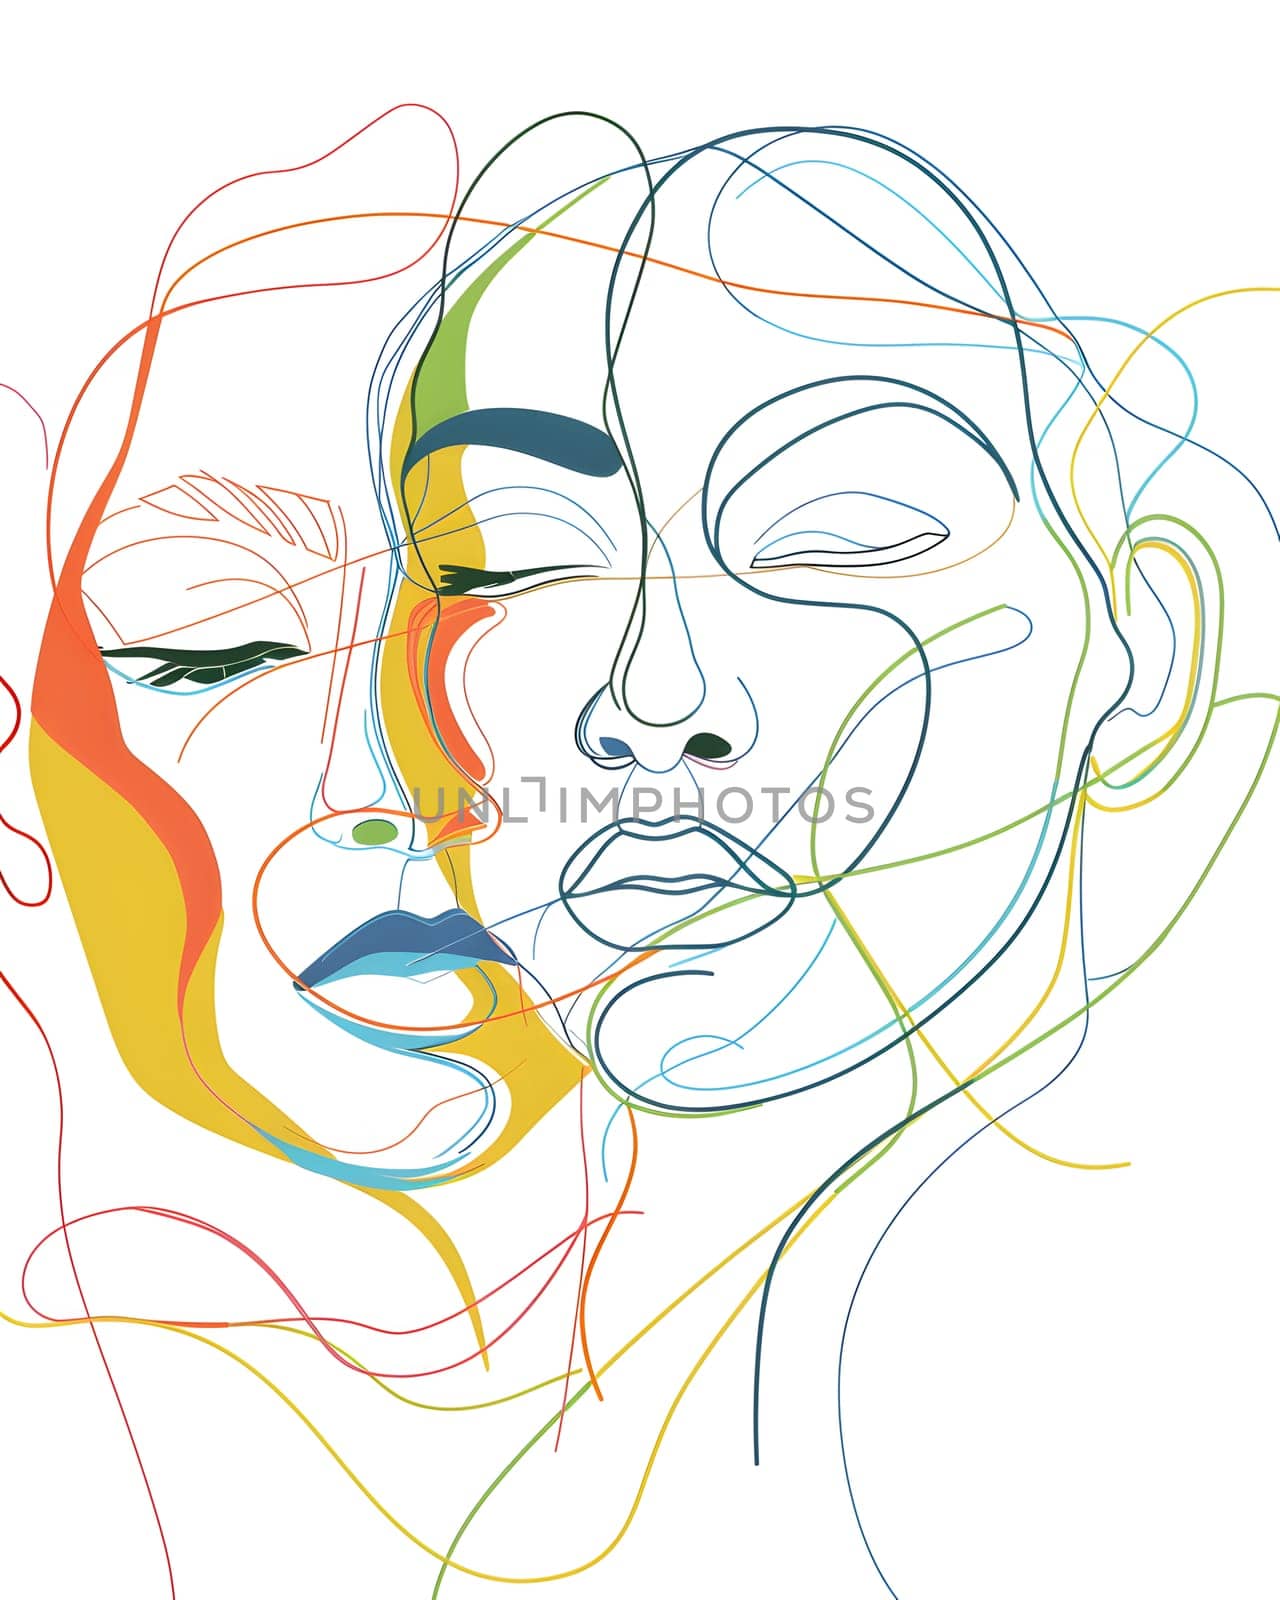 a drawing of two women s faces with their eyes closed by Nadtochiy